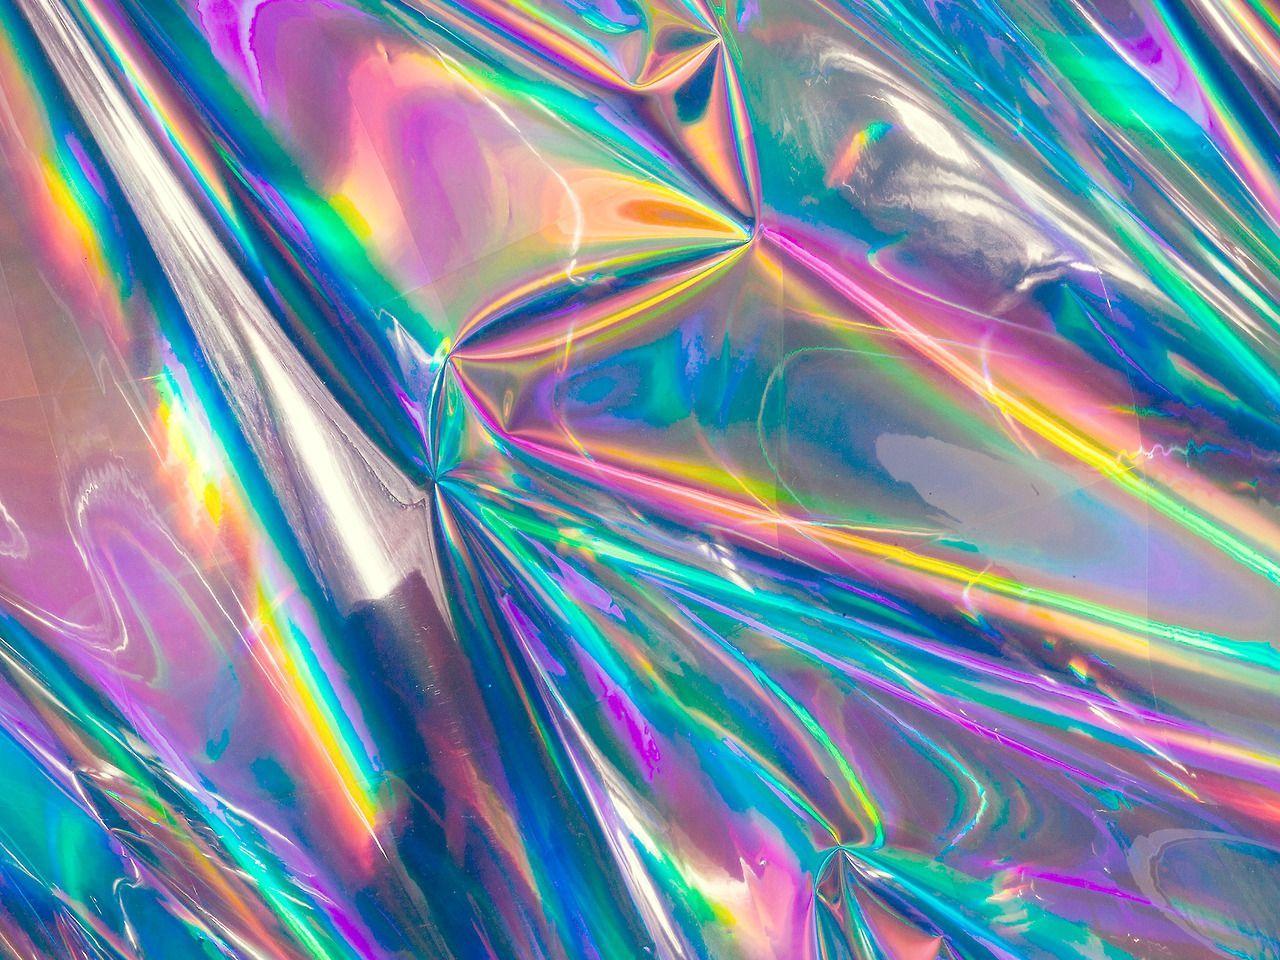 Iridescent Background Images Browse 343960 Stock Photos  Vectors Free  Download with Trial  Shutterstock